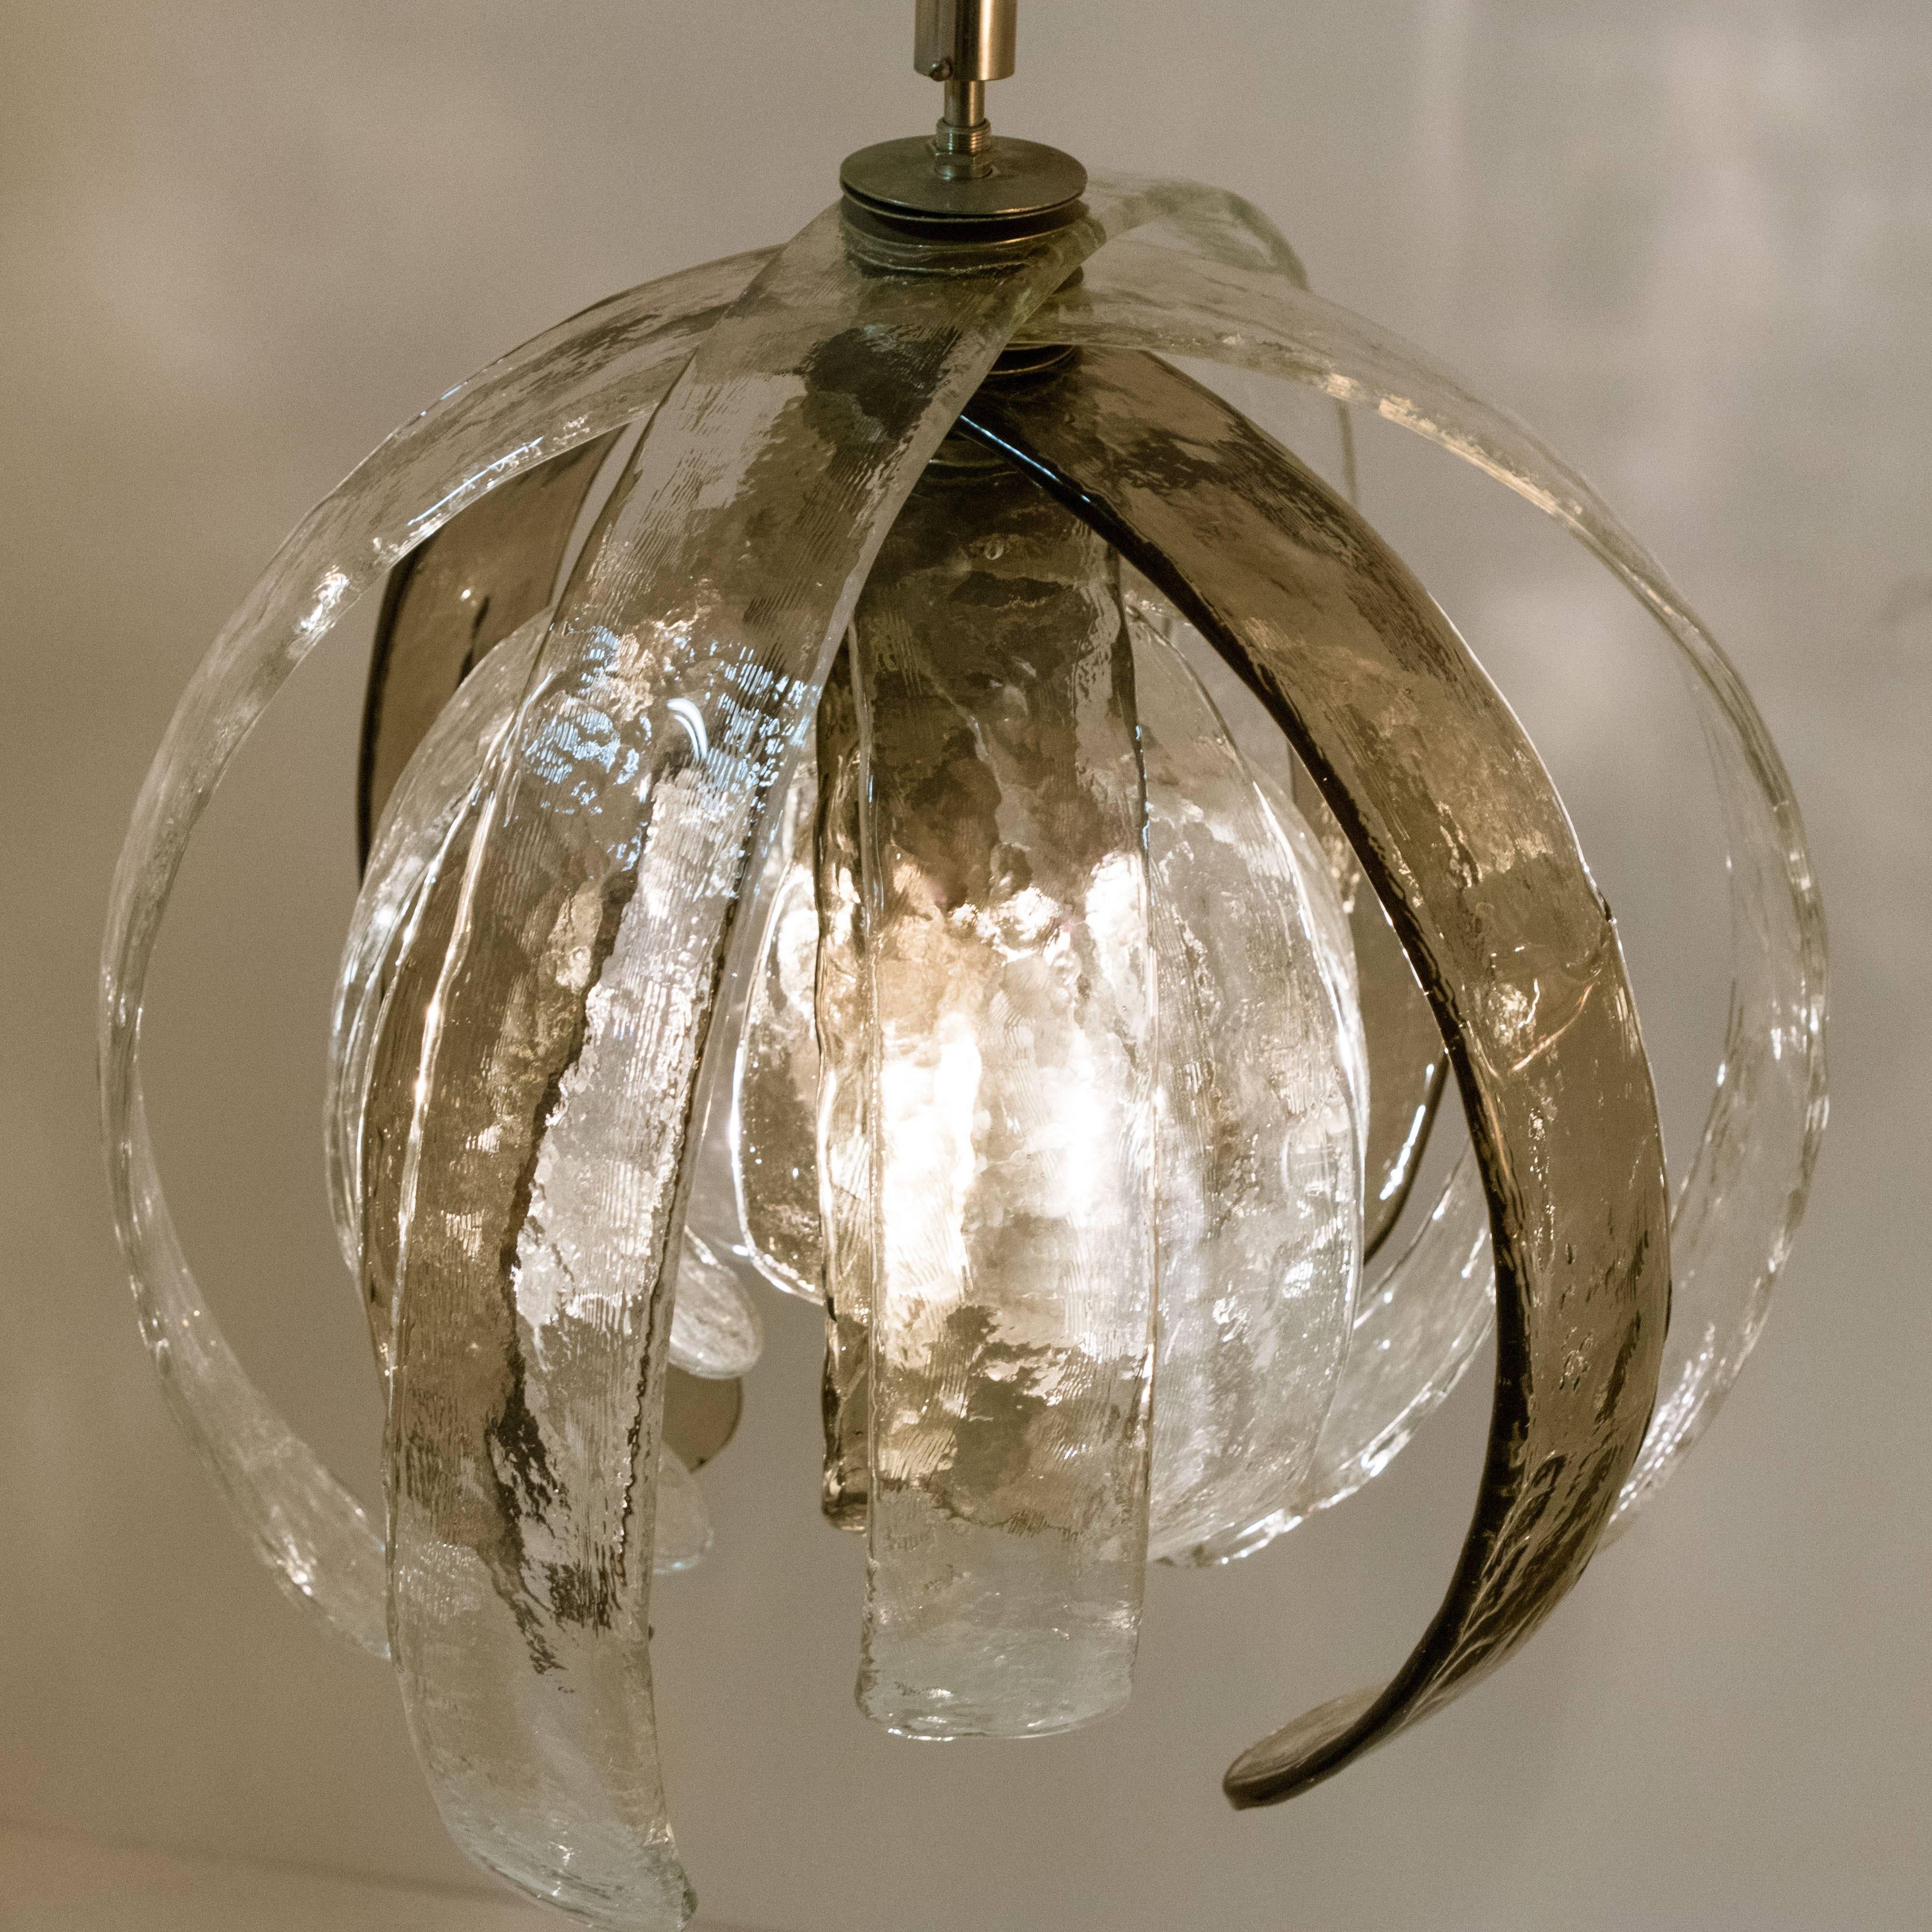 Murano Glass Pair of Sculptural Artichoke Chandeliers by Carlo Nason for Mazzega, Italy